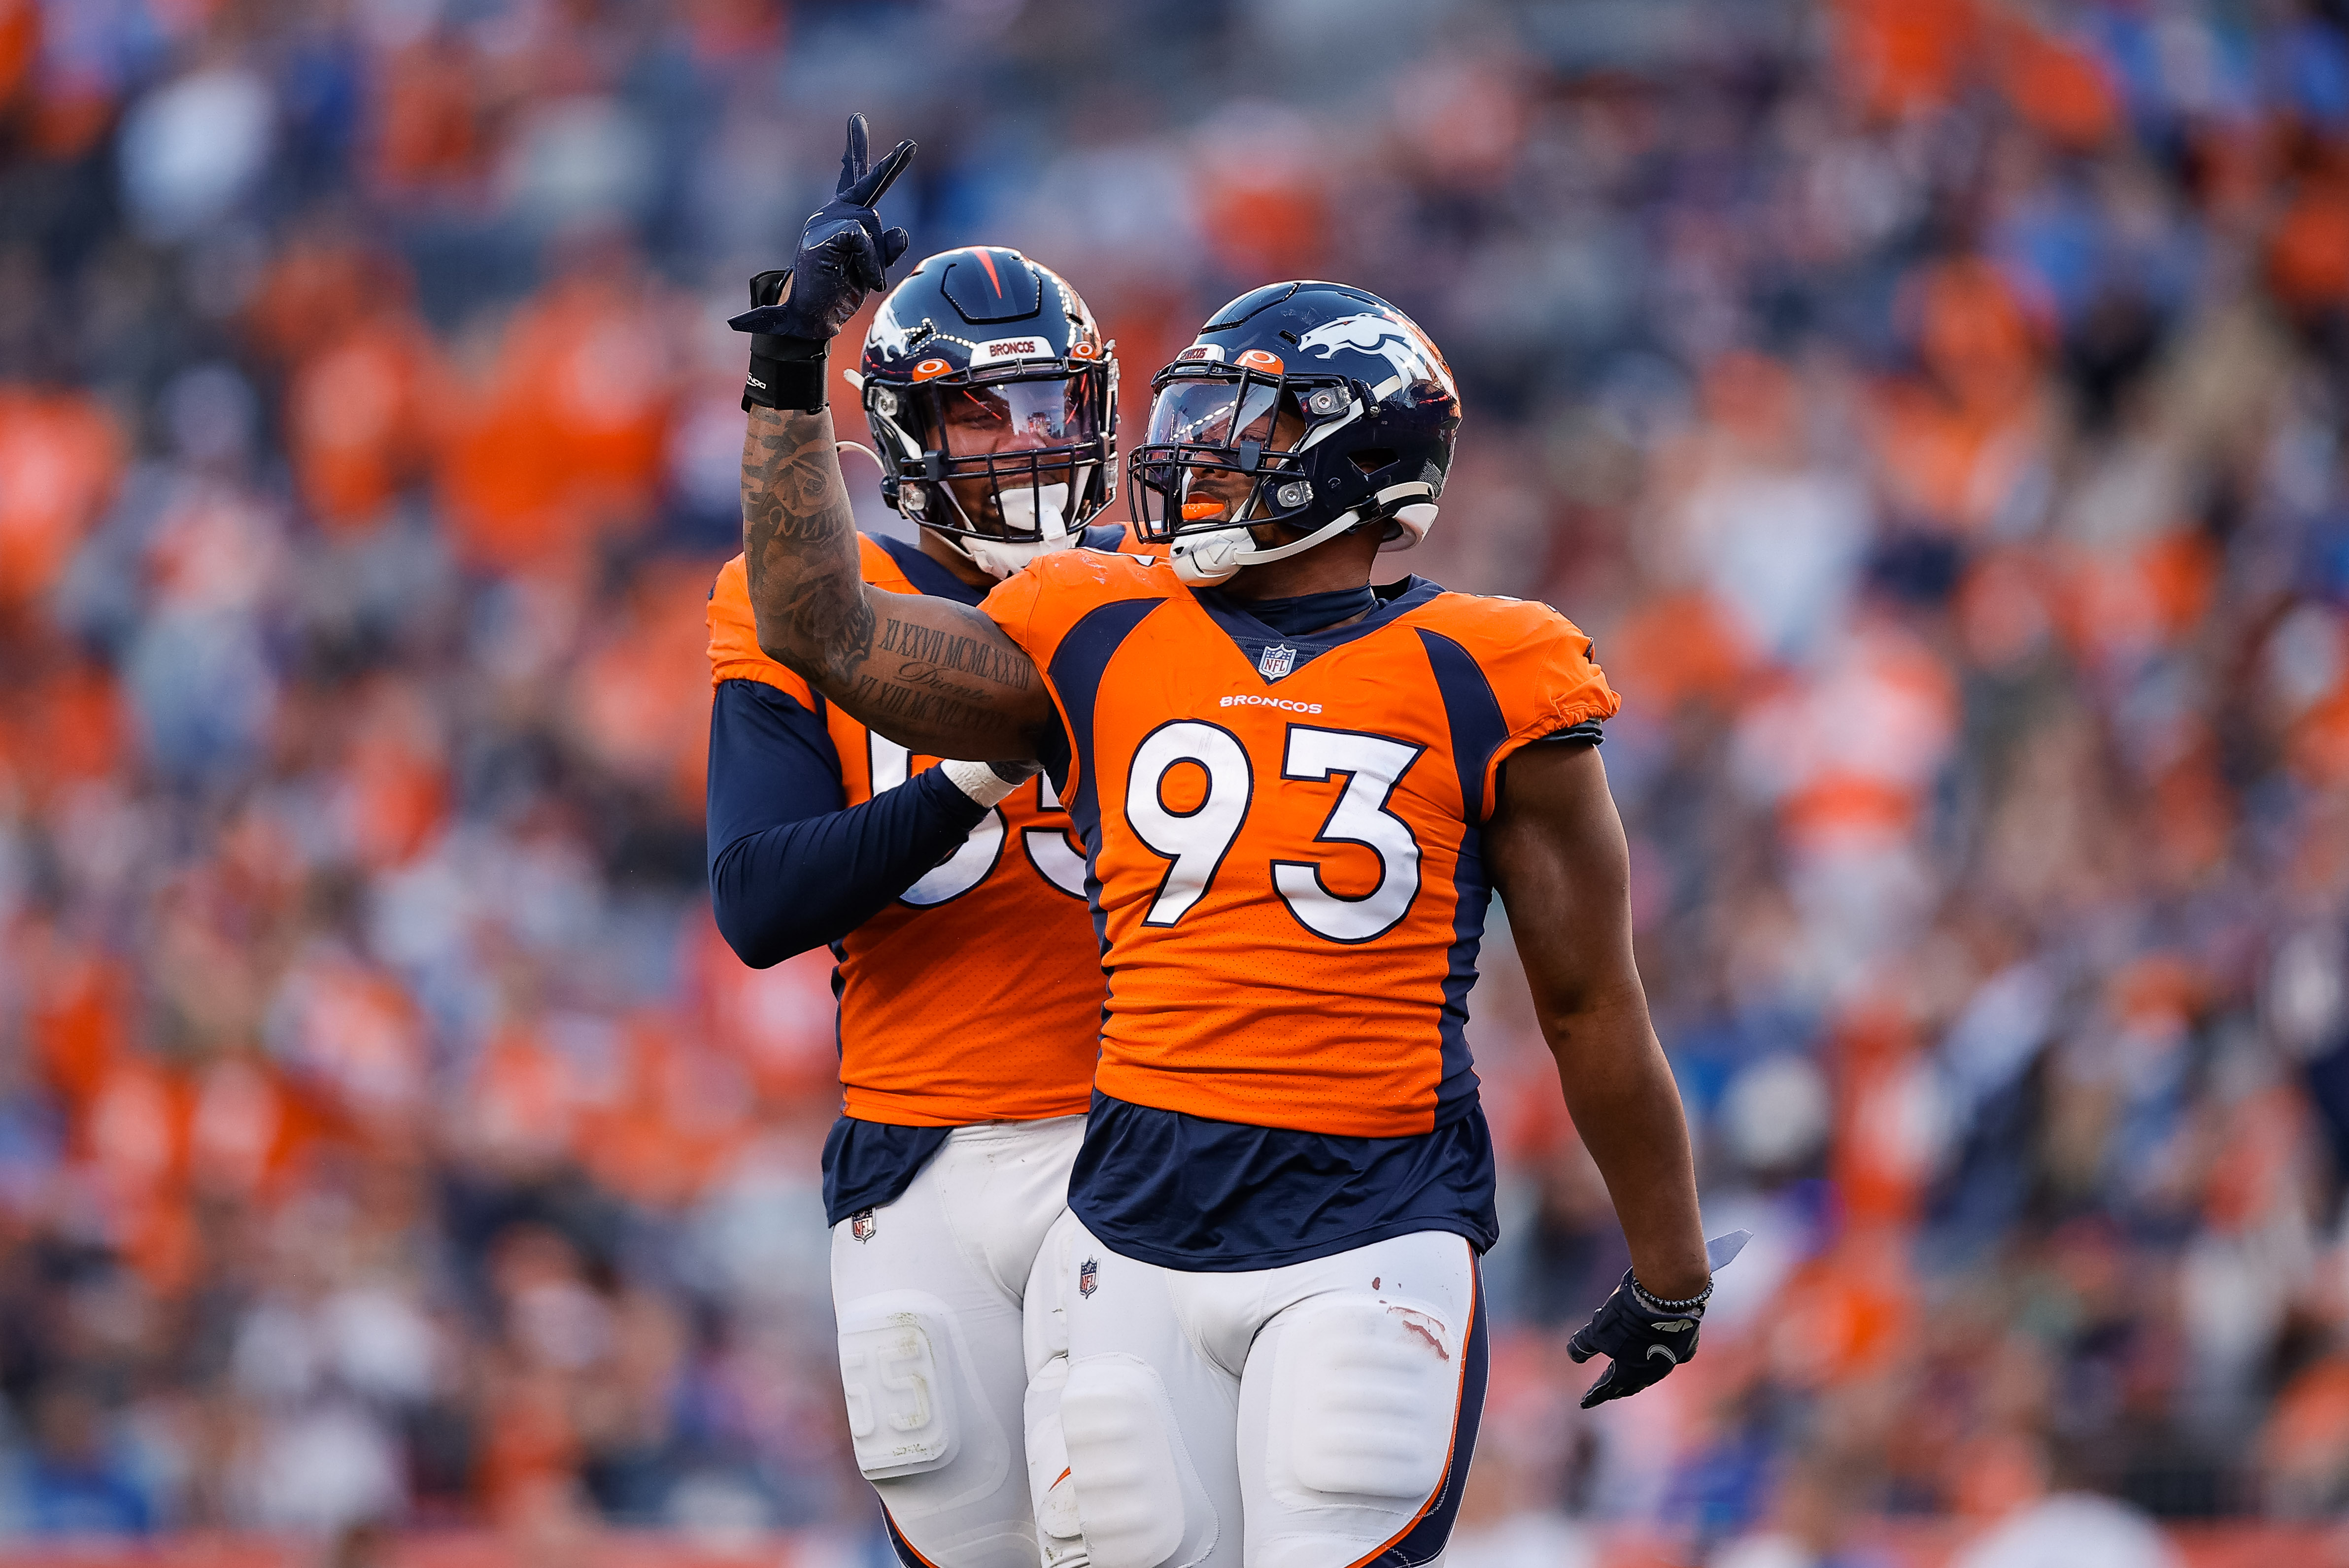 Denver Broncos defensive end Dre'Mont Jones (93) celebrates with linebacker Bradley Chubb (55) after a play in the third quarter against the Detroit Lions at Empower Field at Mile High. 